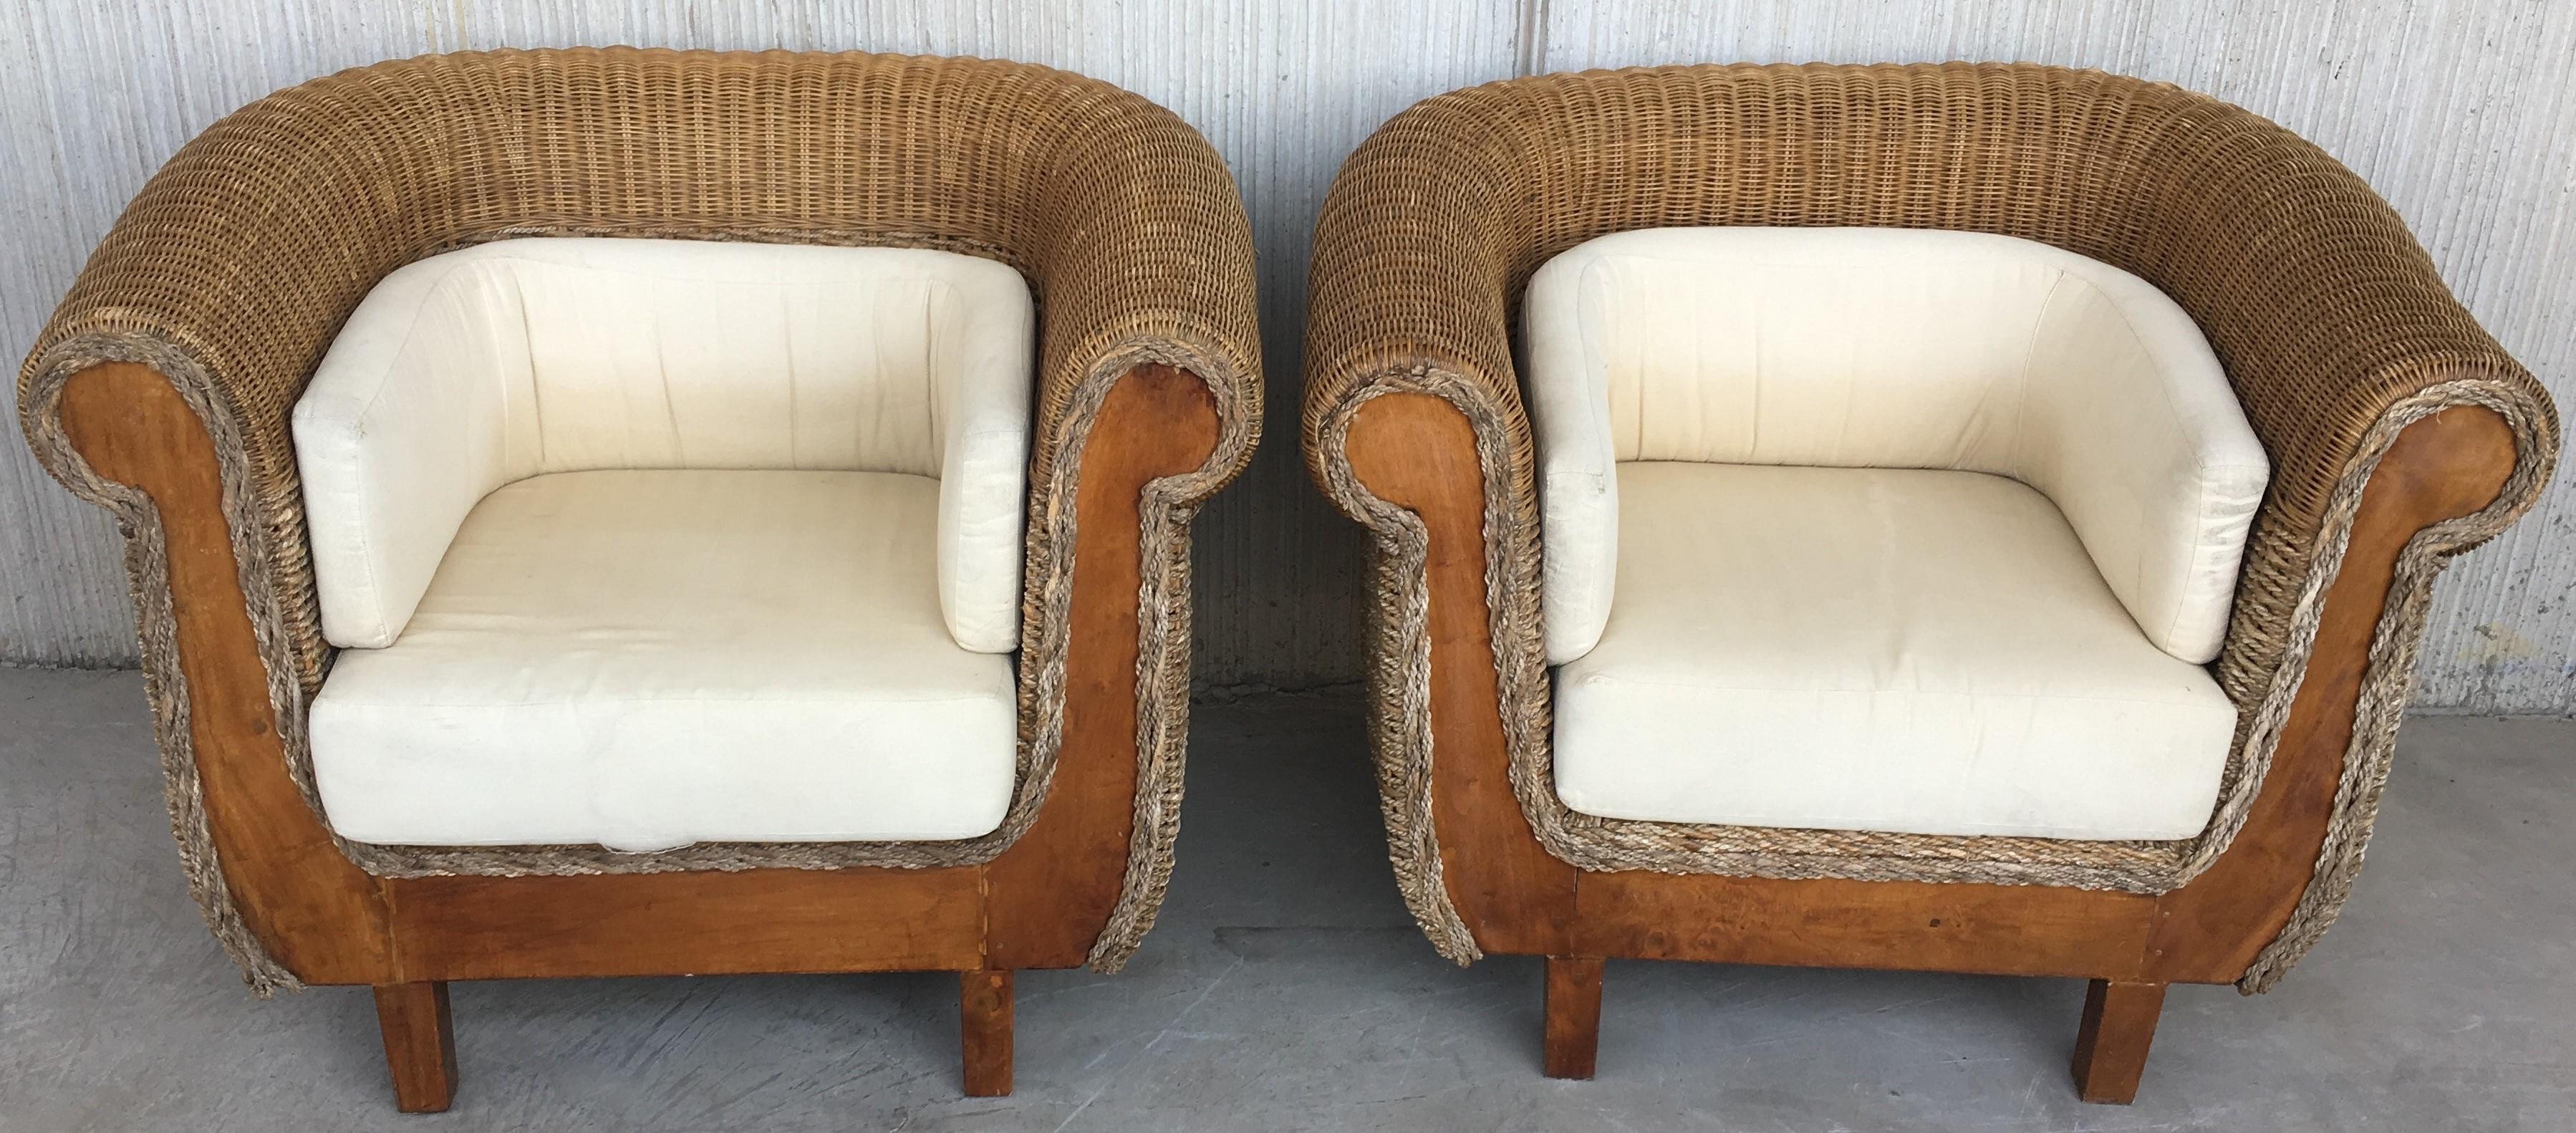 Midcentury set of big armchairs  rattan and wood
Living room set.

Available matching Table, measurements: Height 21.65in, deep 22.44in, wide 42.12 in.